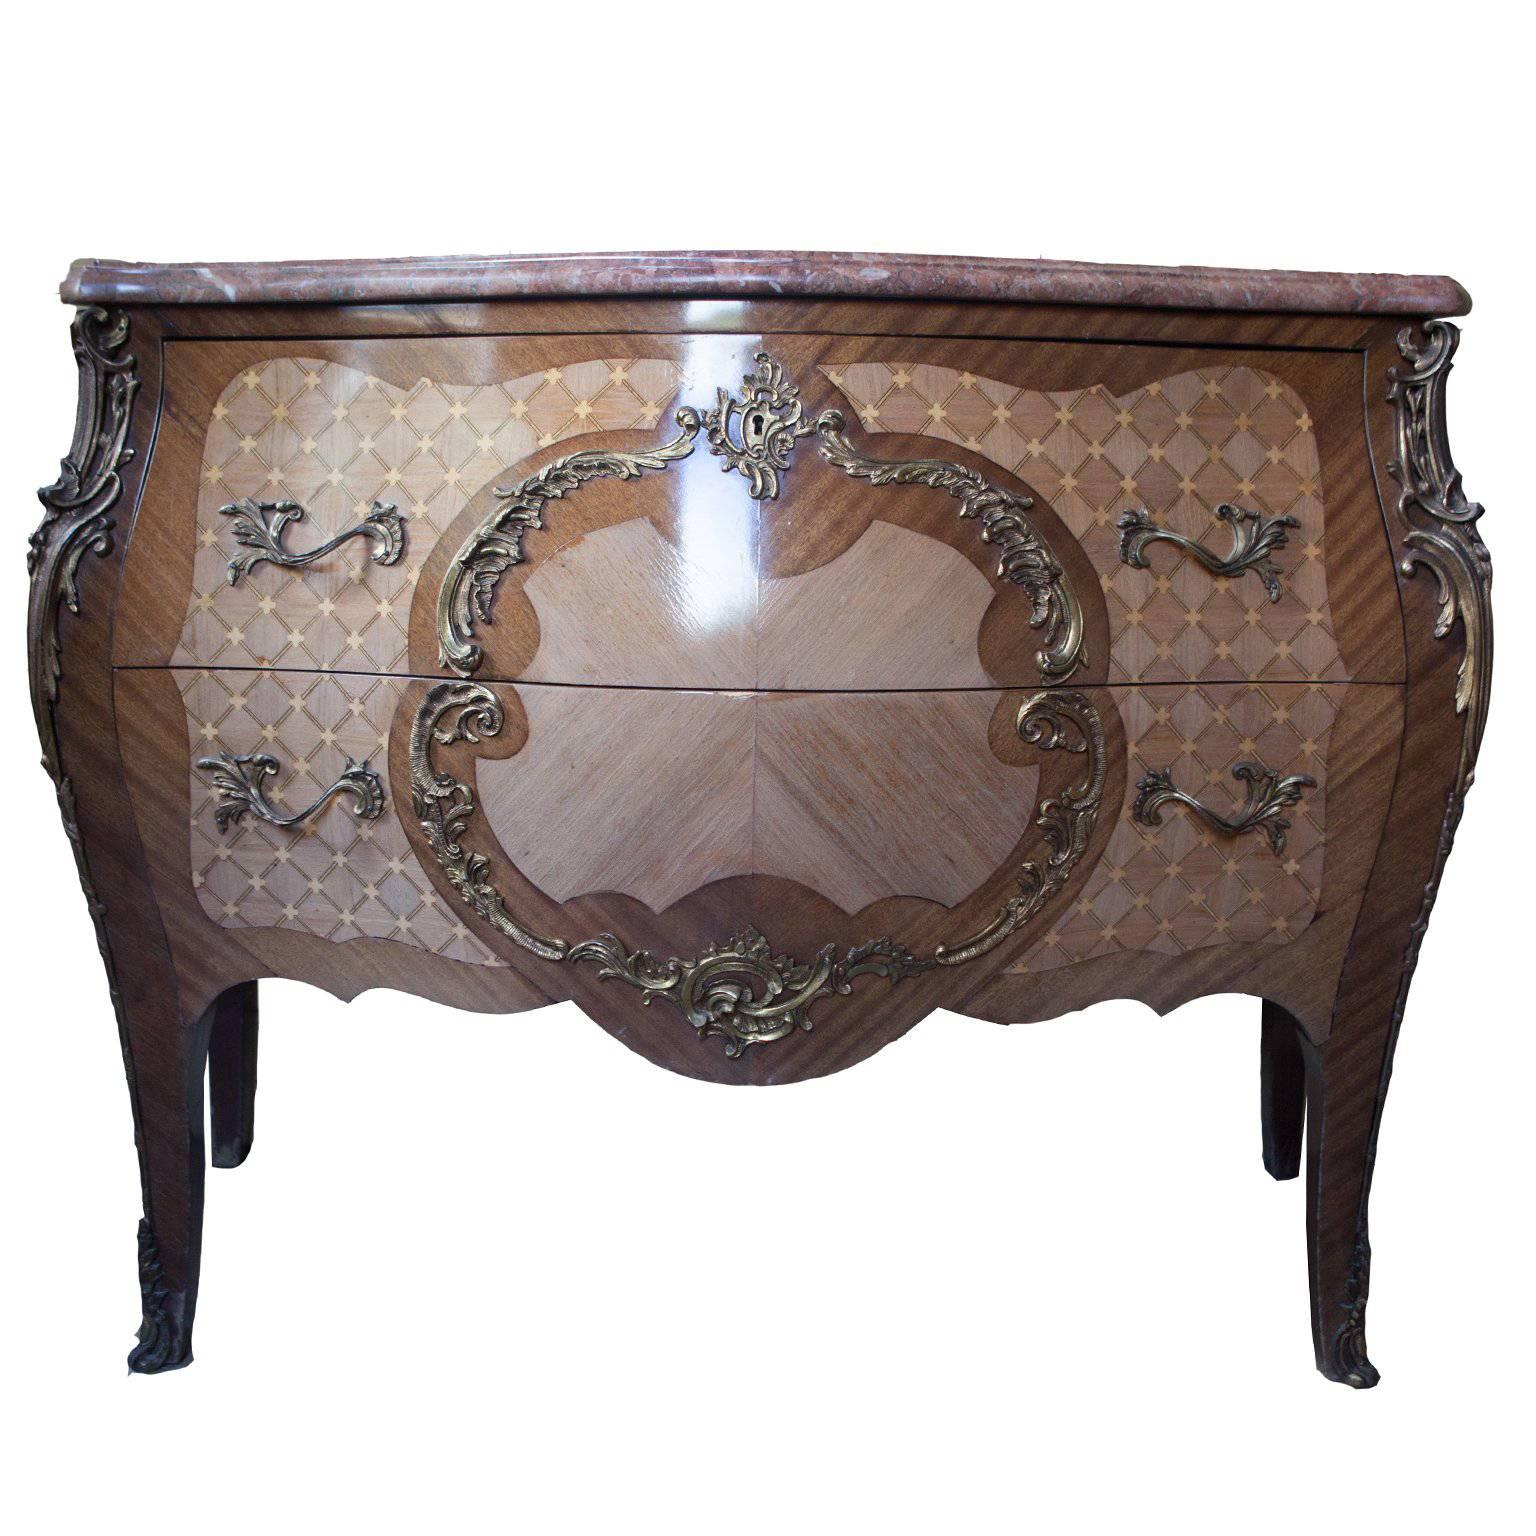 20th Century French Ormolu Gilt Chest with Inlay